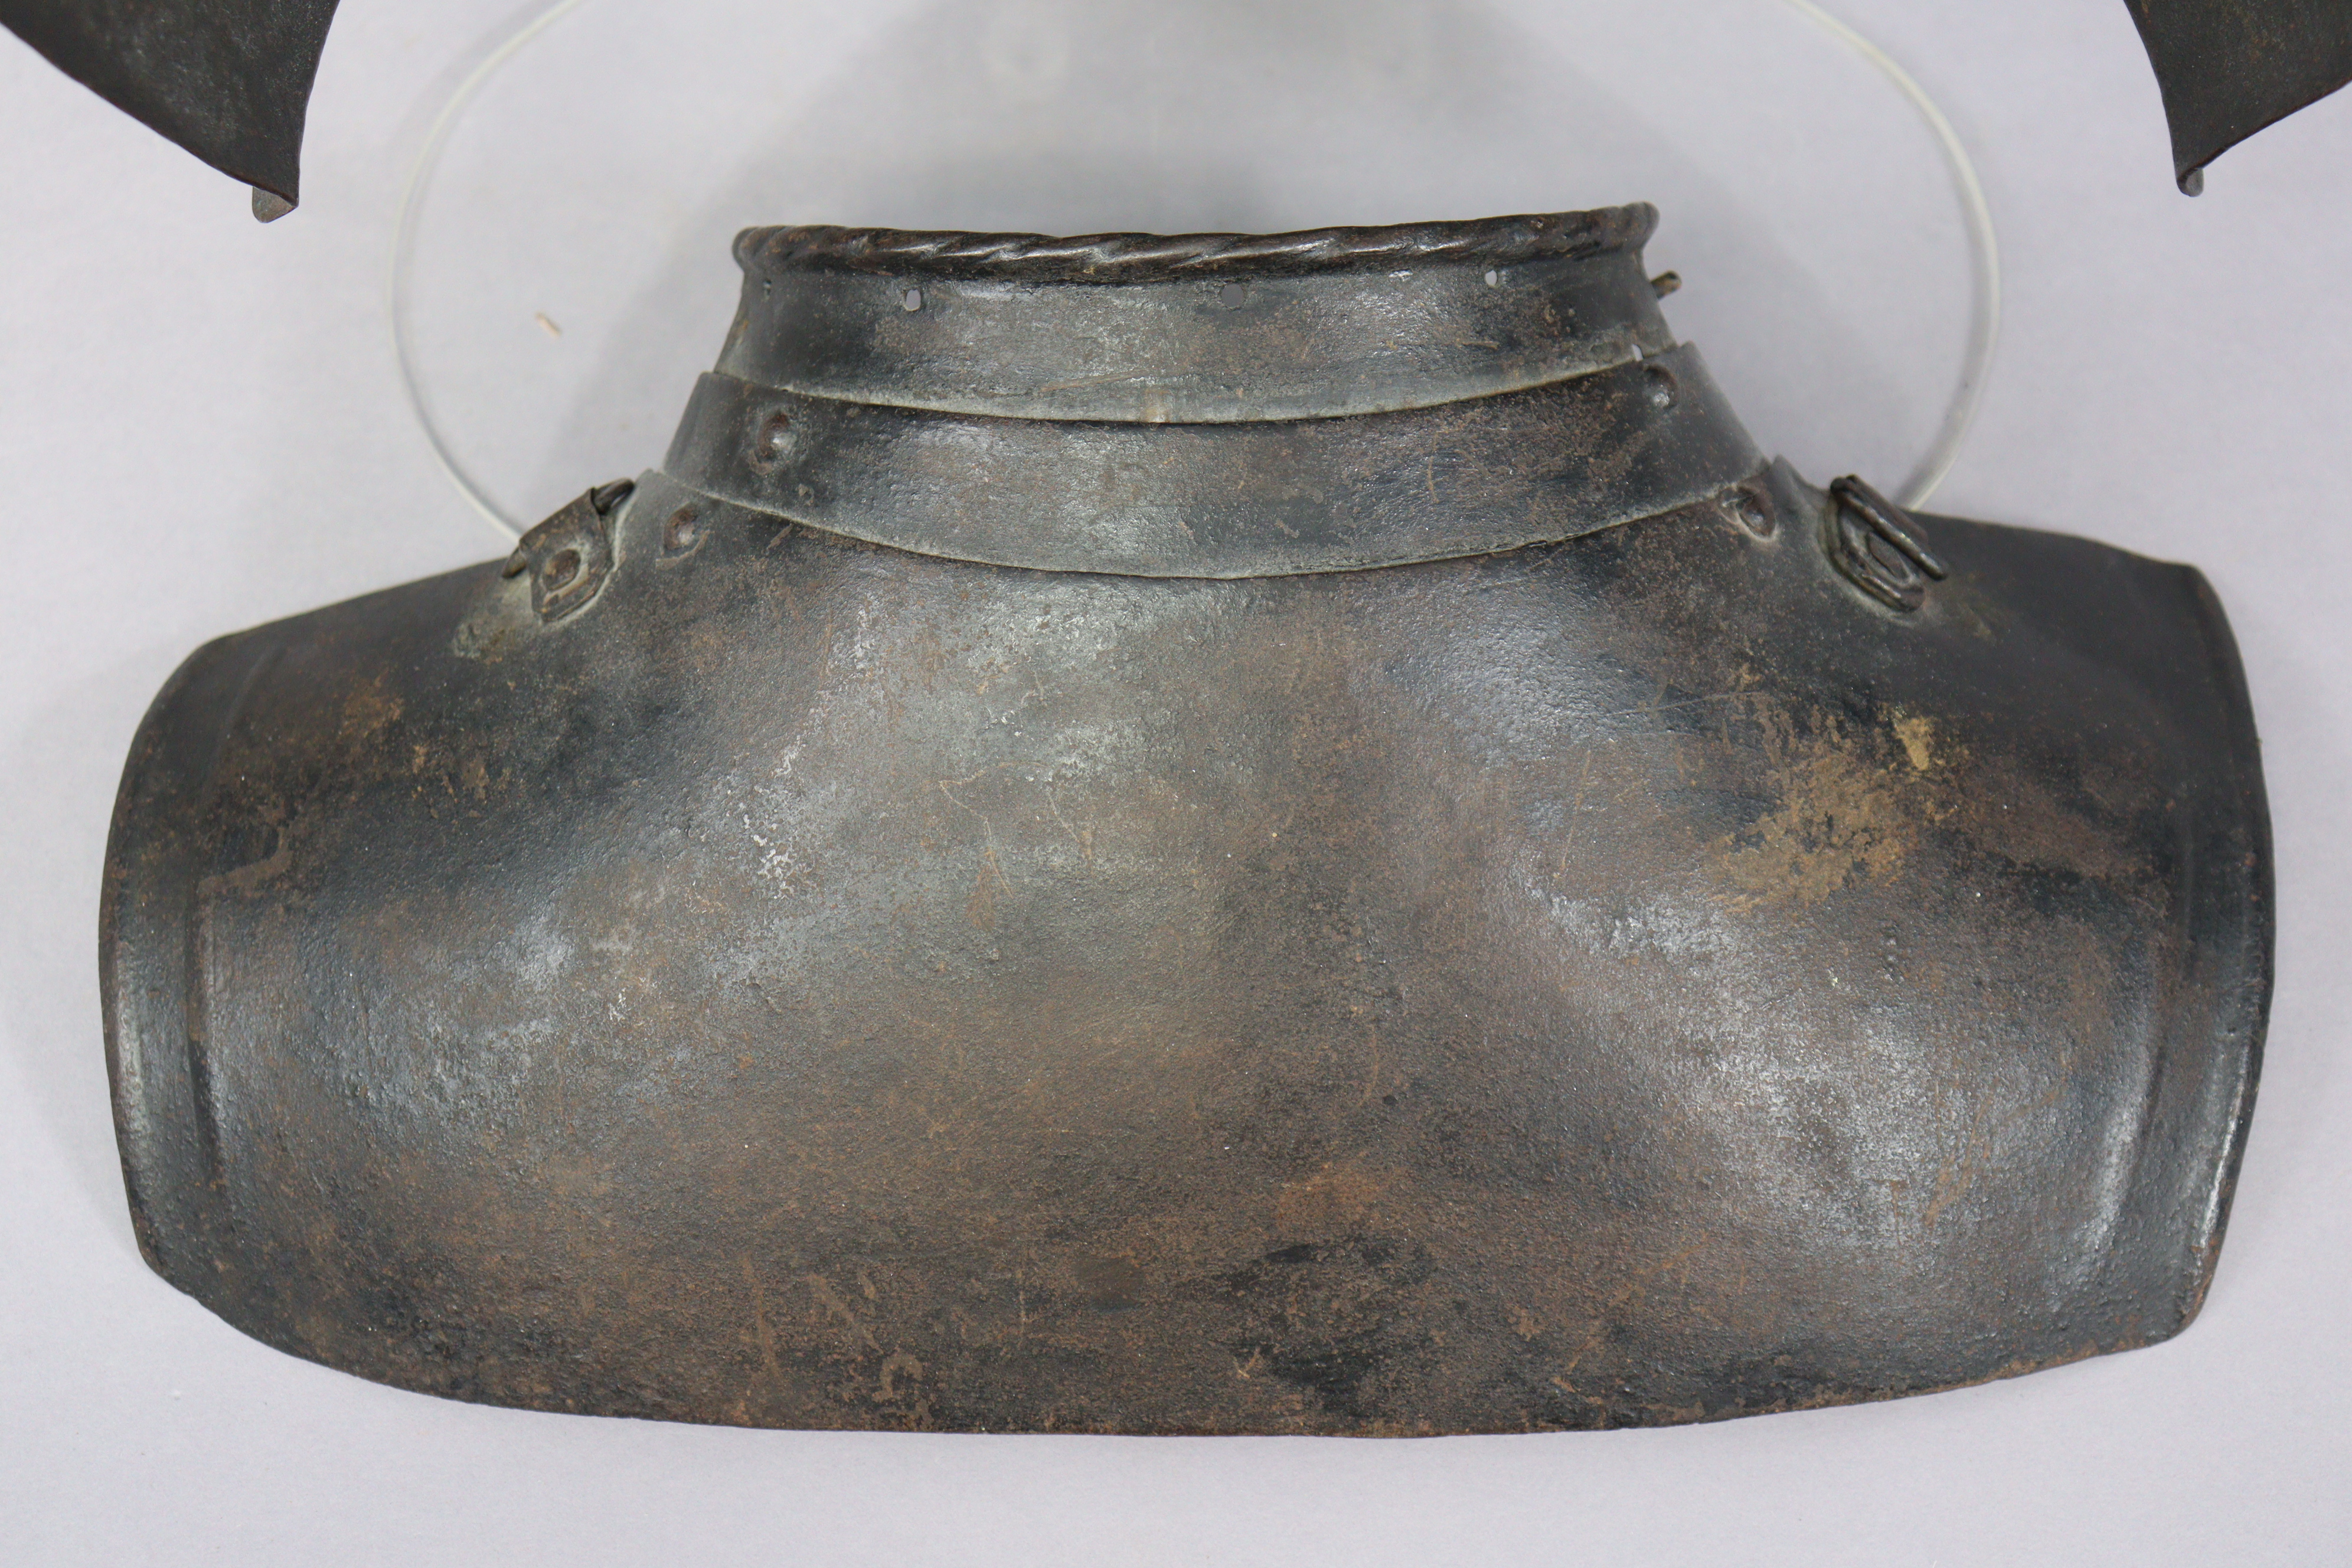 An English Civil War period lobster-tail steel helmet & breastplate, the pot helmet of typical form, - Image 10 of 11